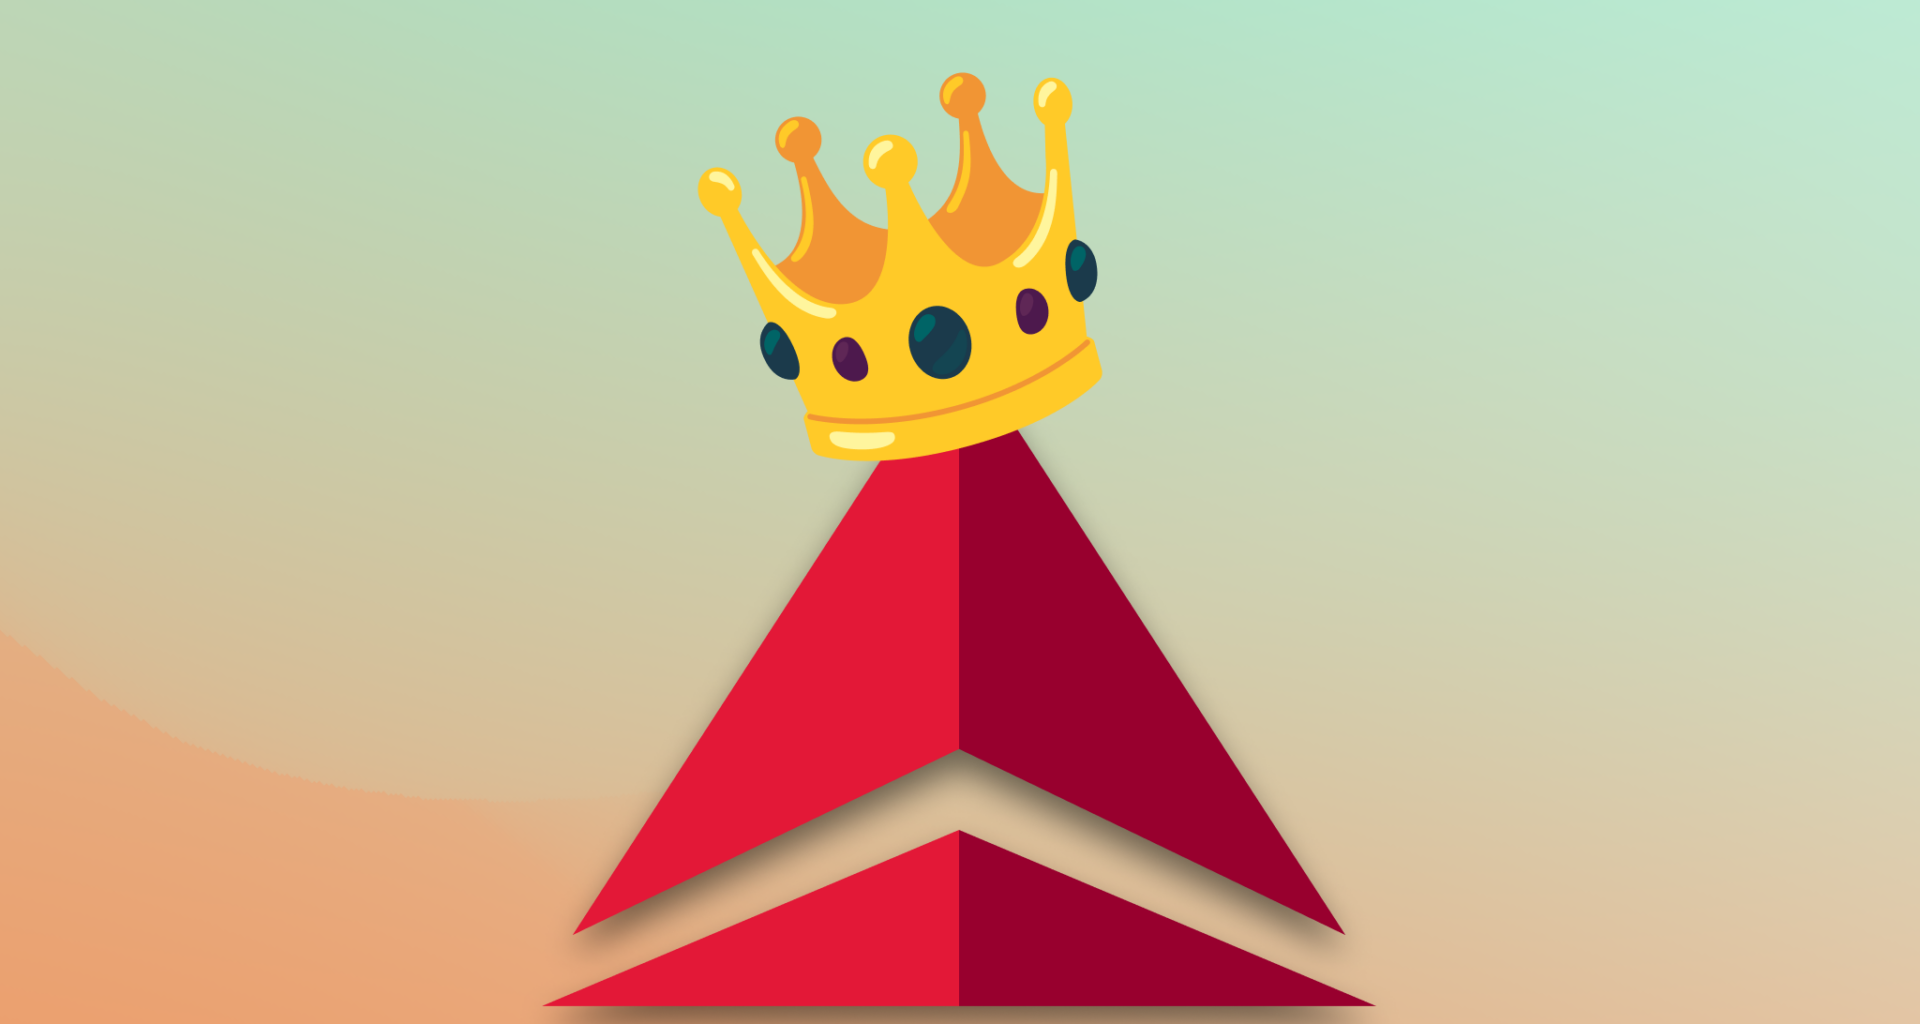 Delta logo with crown